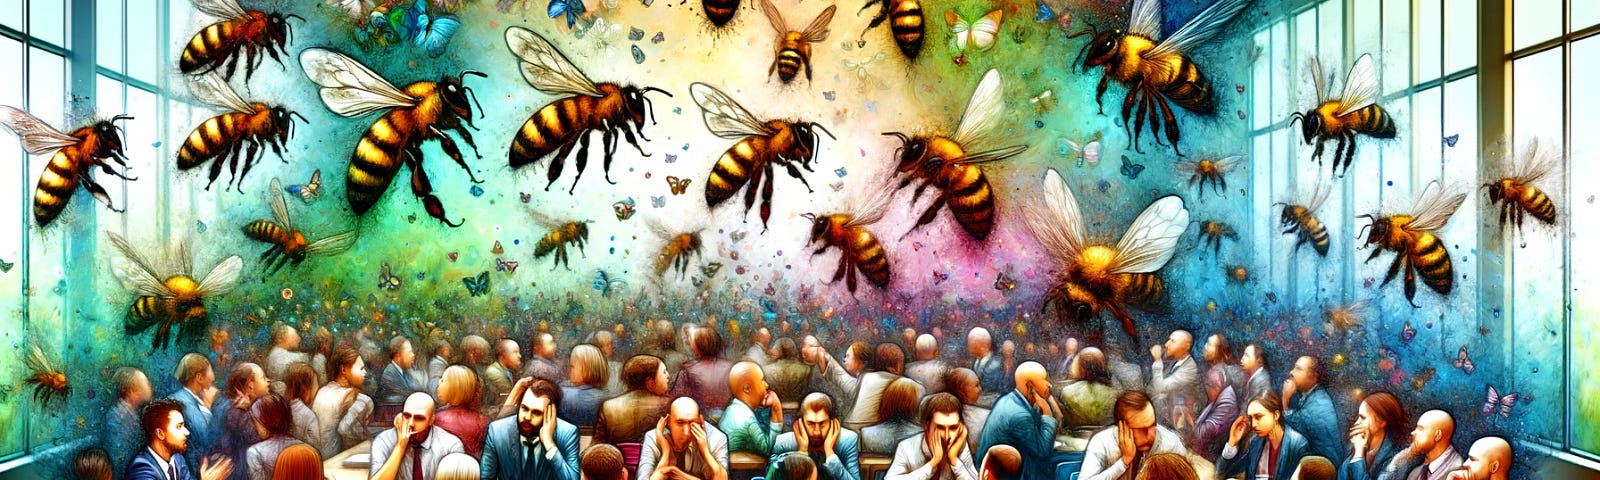 A detailed hyper-realistic watercolour image of a chaotic meeting room with unique, vivid faces, buzzing bees, and vibrant colours, symbolizing an ADHD mind.